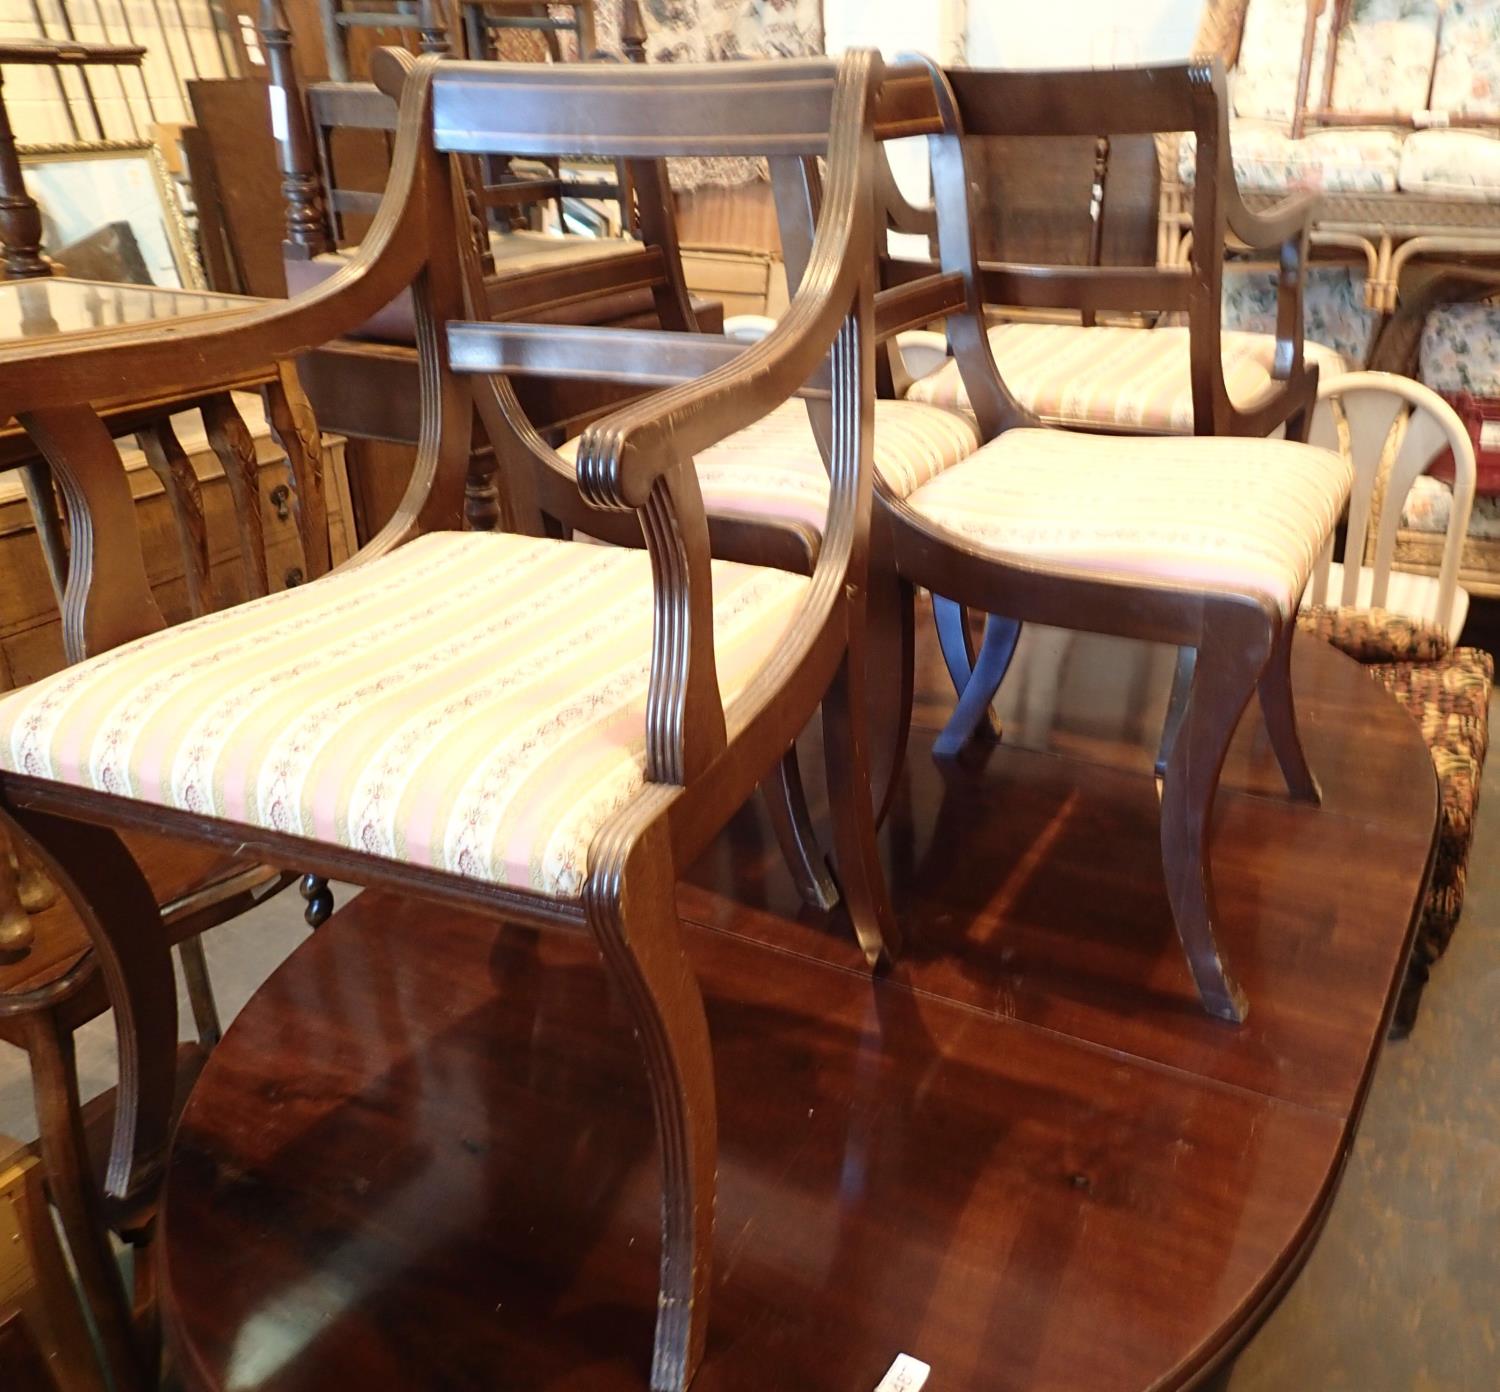 Eight reprobuction mahogany dining chairs (6+2). Not available for in-house P&P, contact Paul O'